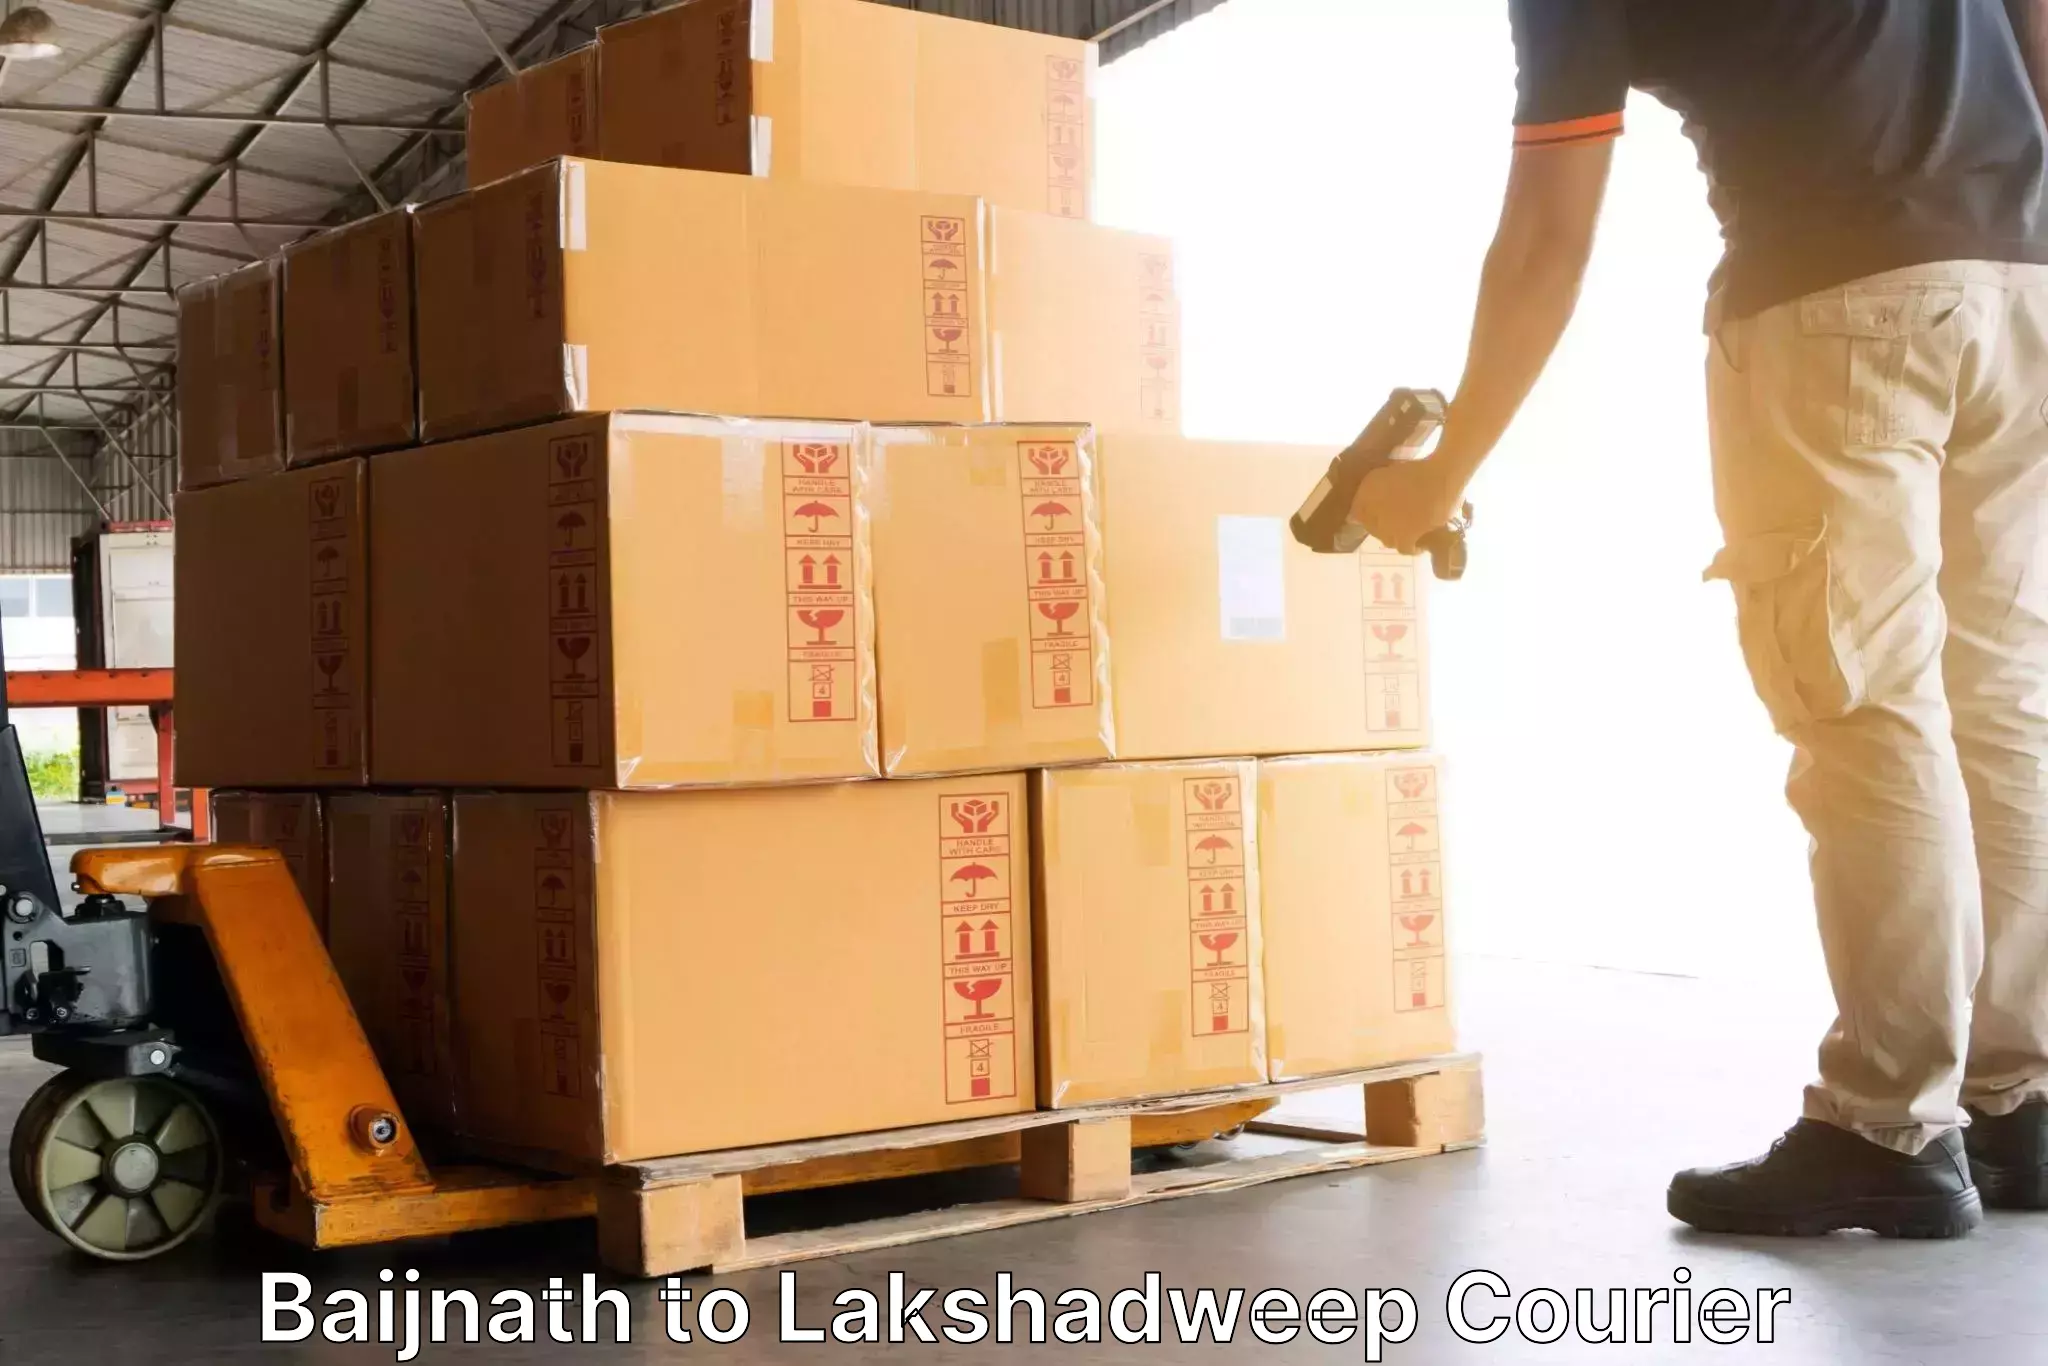 24/7 courier service Baijnath to Lakshadweep